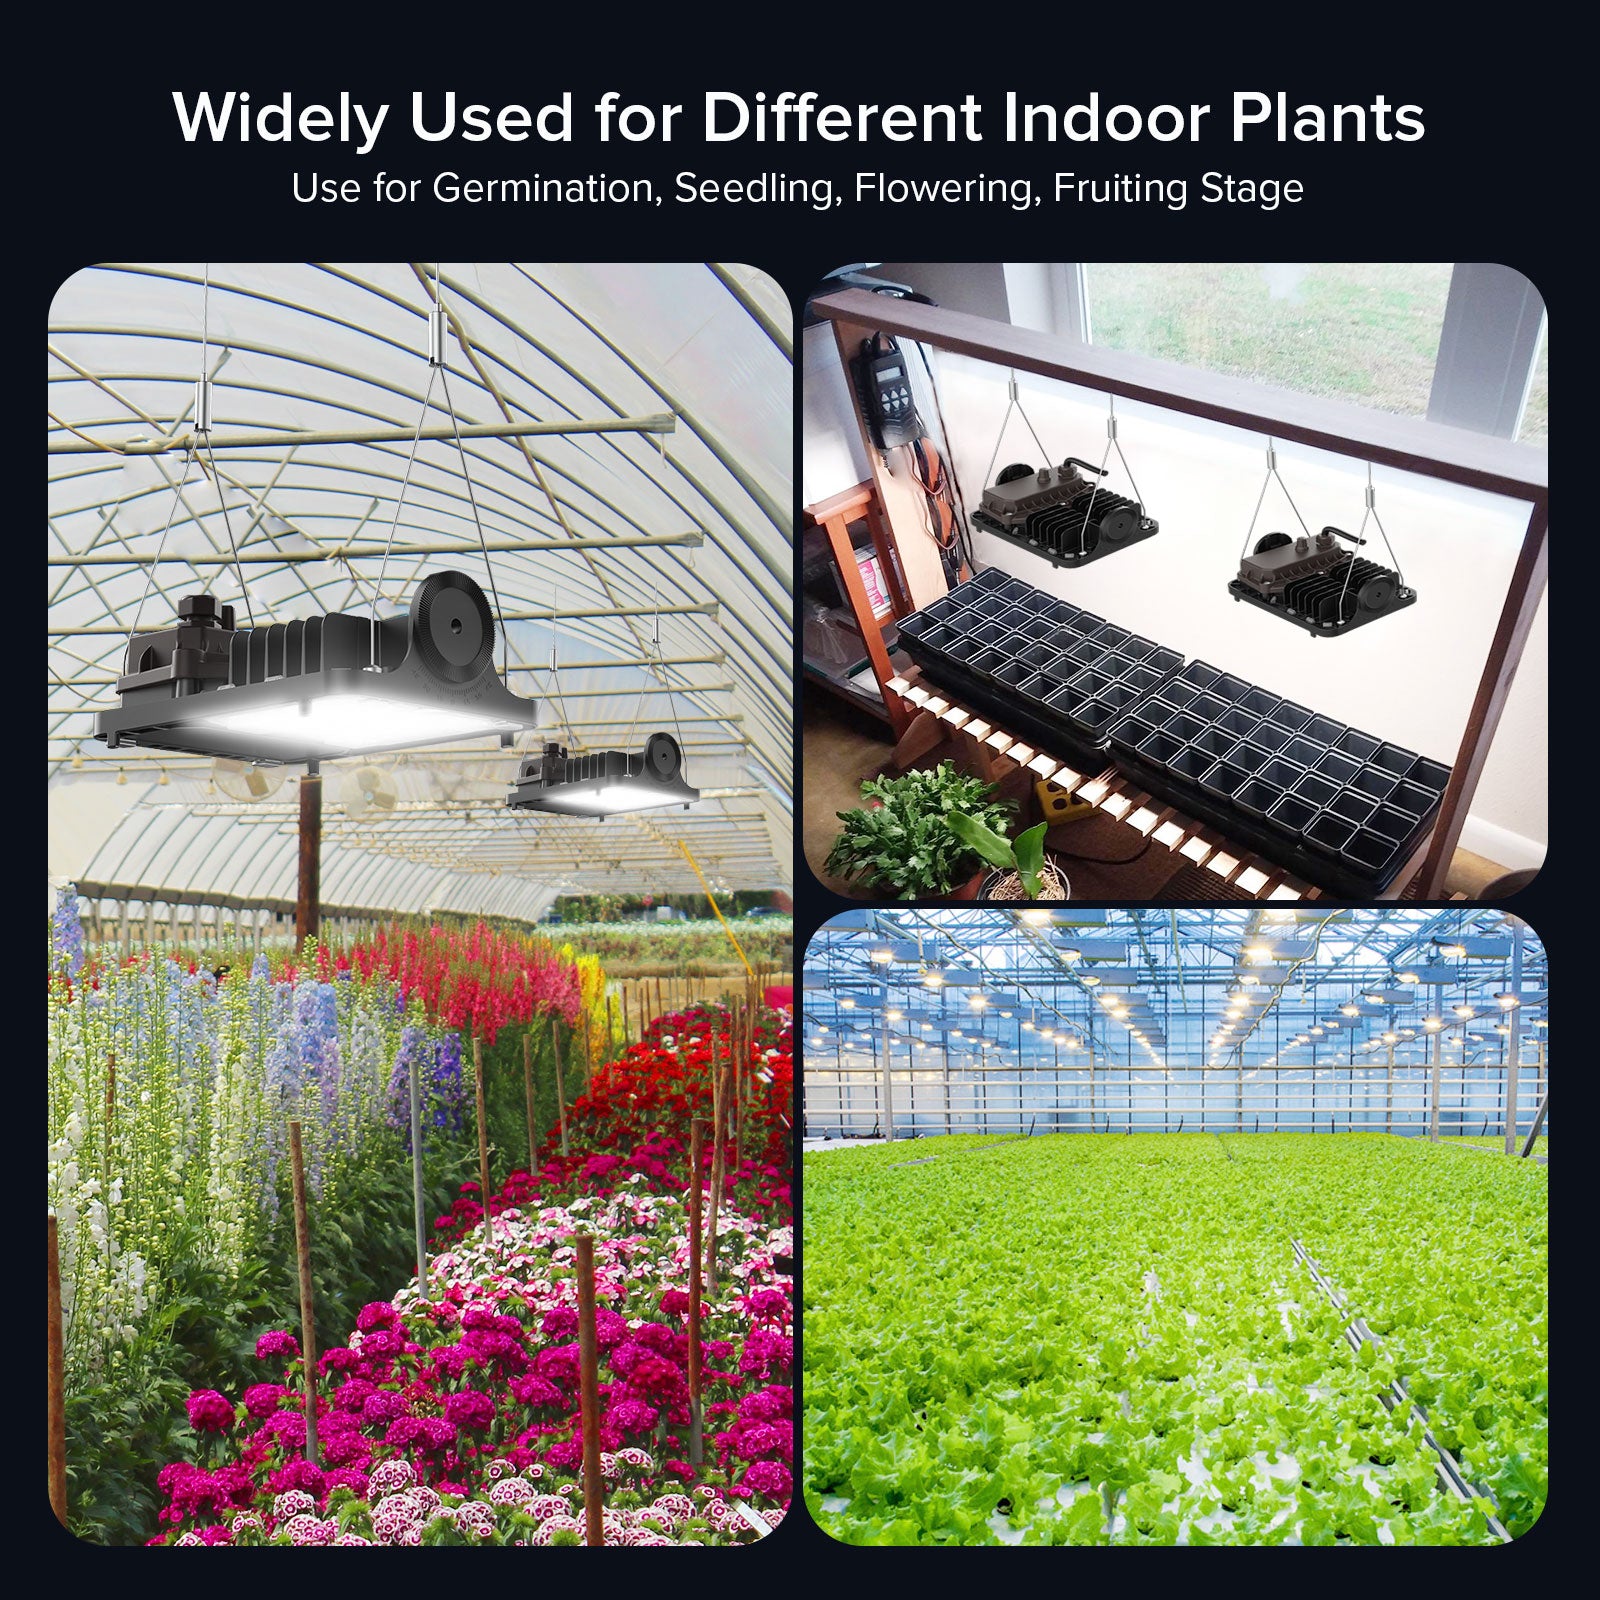 Dimmable 70W LED Grow Light for indoor plants with widely used for different indoor plants